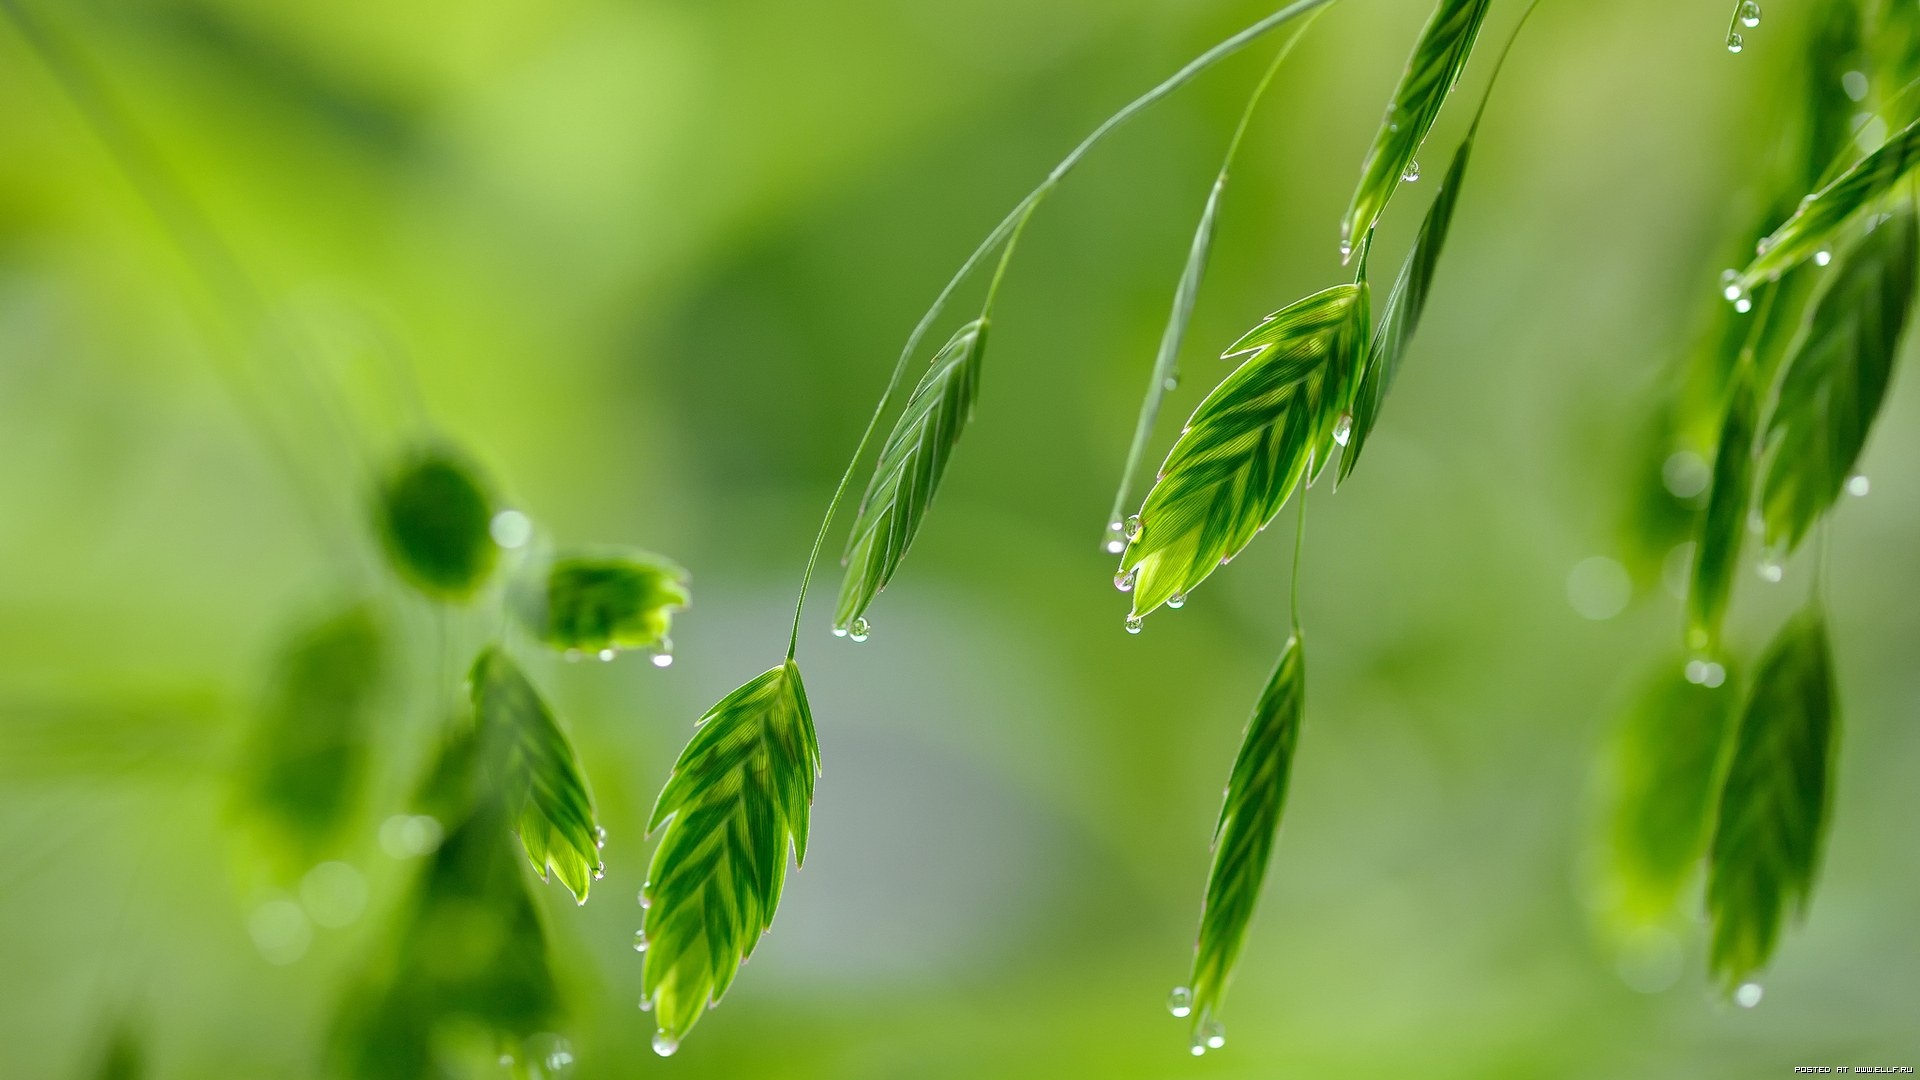 nature wallpaper,green,leaf,water,nature,dew